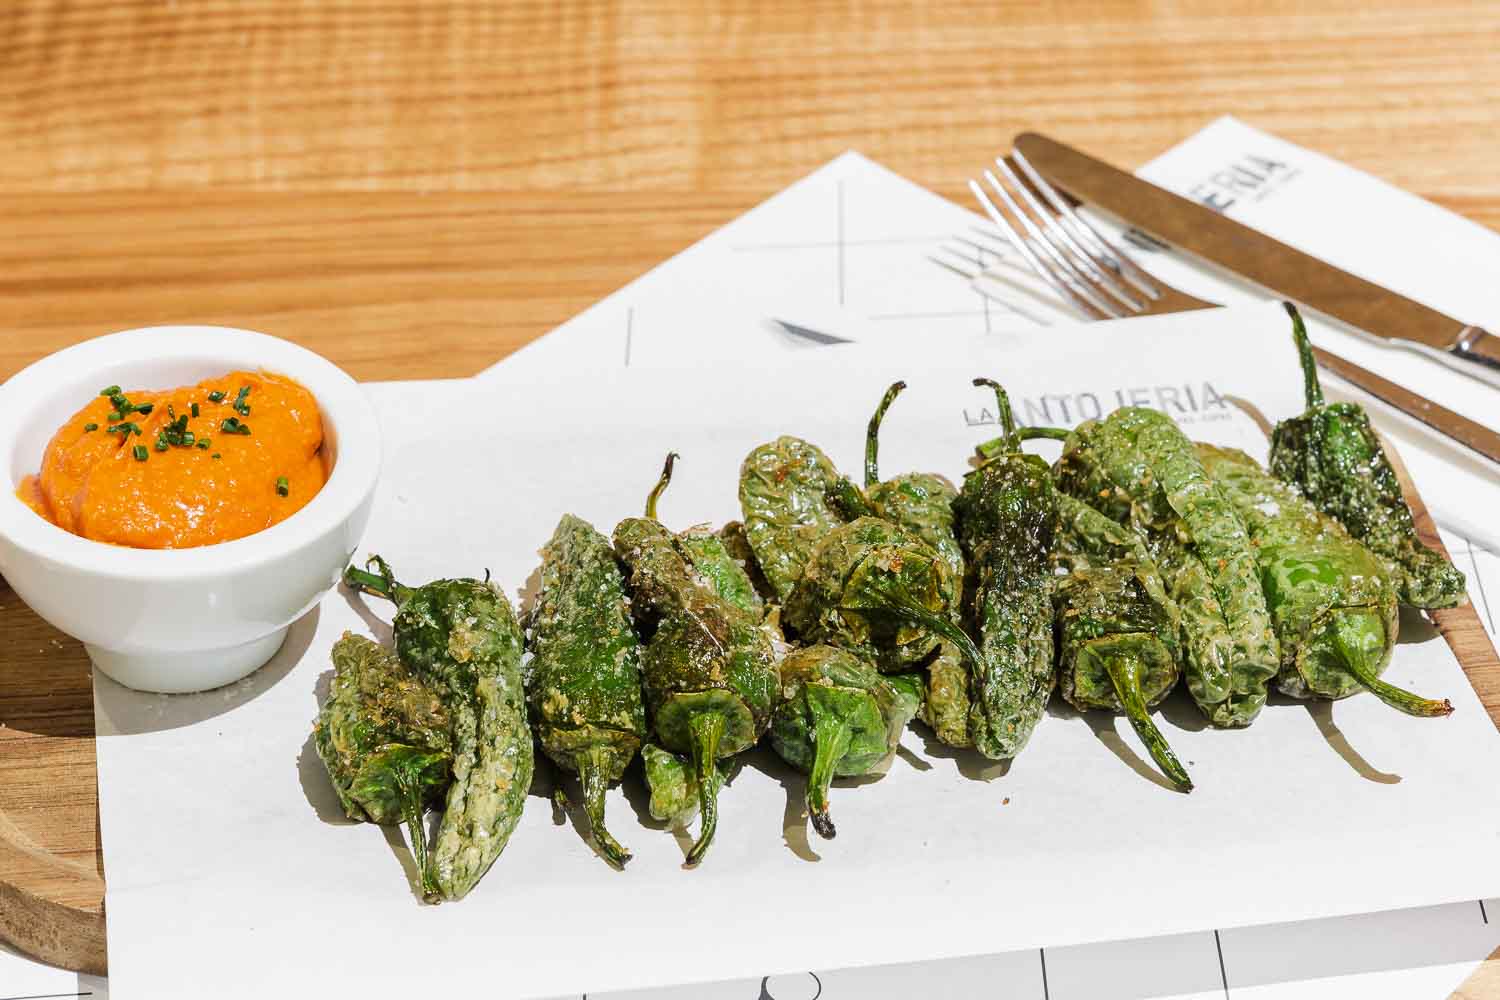 Padron peppers with romescu sauce